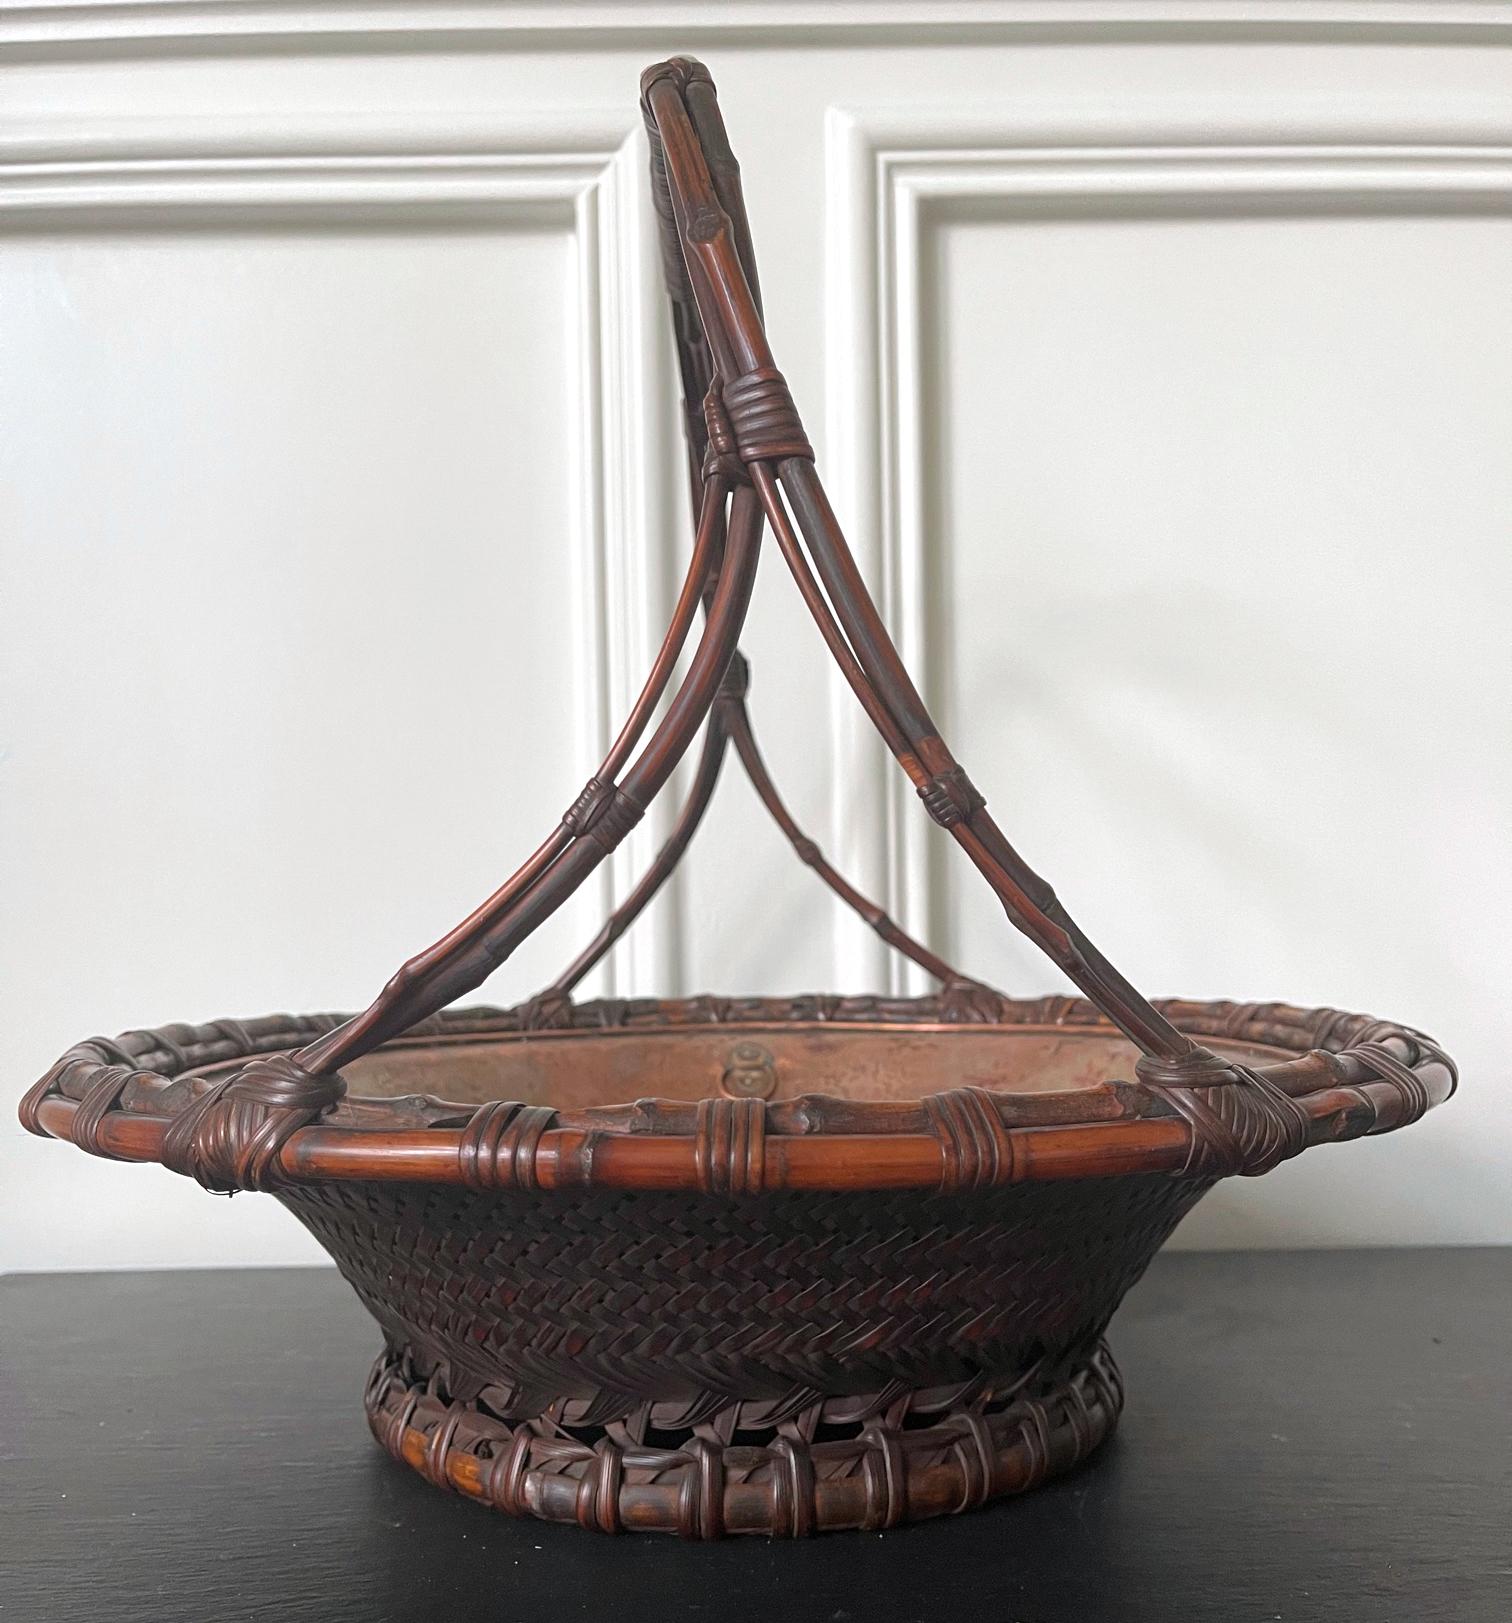 A large and impressive Japanese basket in the form of a morikago by Maeda Chikubosai I (1872-1950) circa first half of the 20th century. Chikubosai I was from the Kansai Region and active in Sakai, Osaka prefecture. He was instructed by Wada